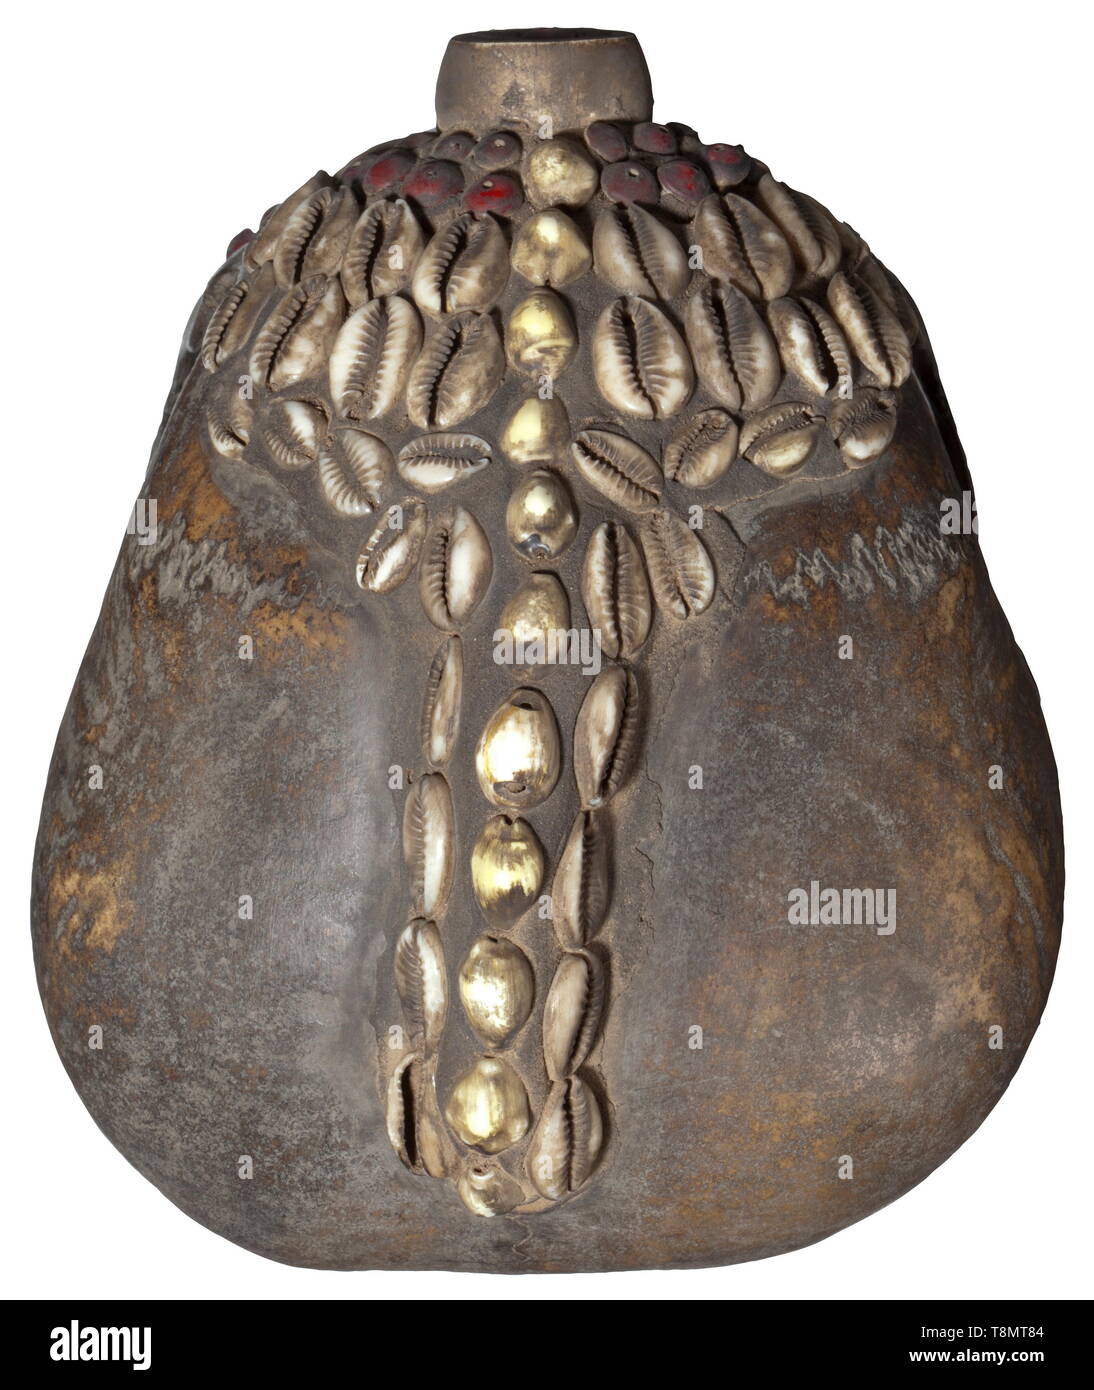 A Papua New Guinean ancestor's skull Human skull without lower jaw, the eye sockets, nasal cavity, forehead and crown decorated with seeds and cowry shells. Surfaces patinated and with signs of age. Most of the teeth of the upper jaw missing. Height 16.5 cm. historic, historical, Indonesian archipelago, Indonesia, Far East, Asia, Asian, ethnology, ethnicity, ethnic, tribal, object, objects, stills, clipping, clippings, cut out, cut-out, cut-outs, Additional-Rights-Clearance-Info-Not-Available Stock Photo